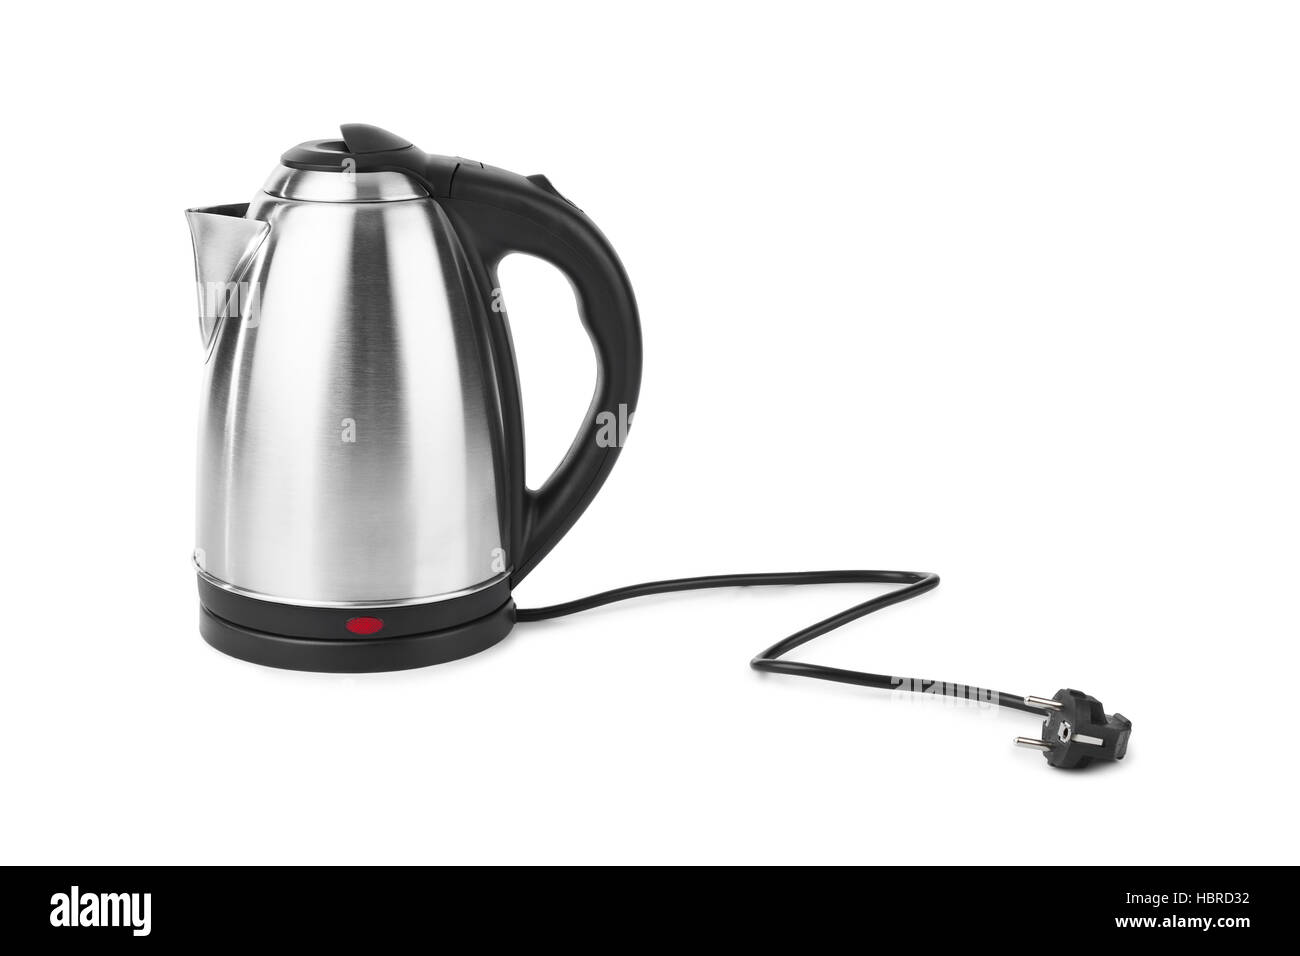 Electric Metallic Kettle with Plug in Socket Stock Photo - Image of  electrical, domestic: 218681954